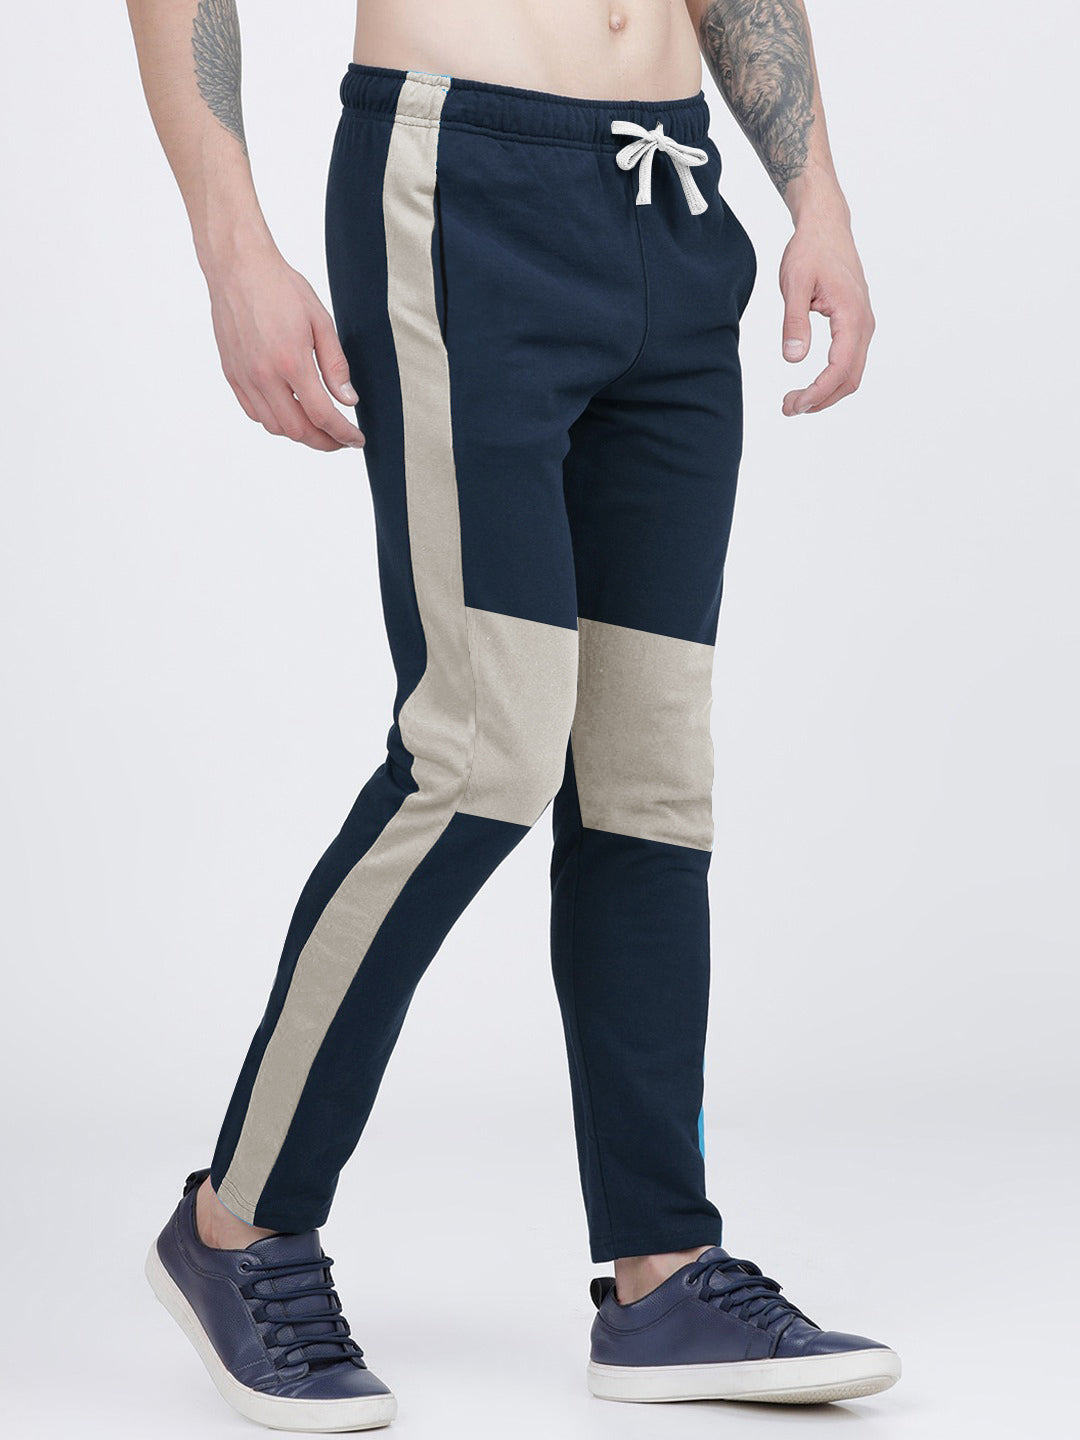 Summer Single Jersey Slim Fit Trouser For Men-Navy With Skin Pannel-SP122